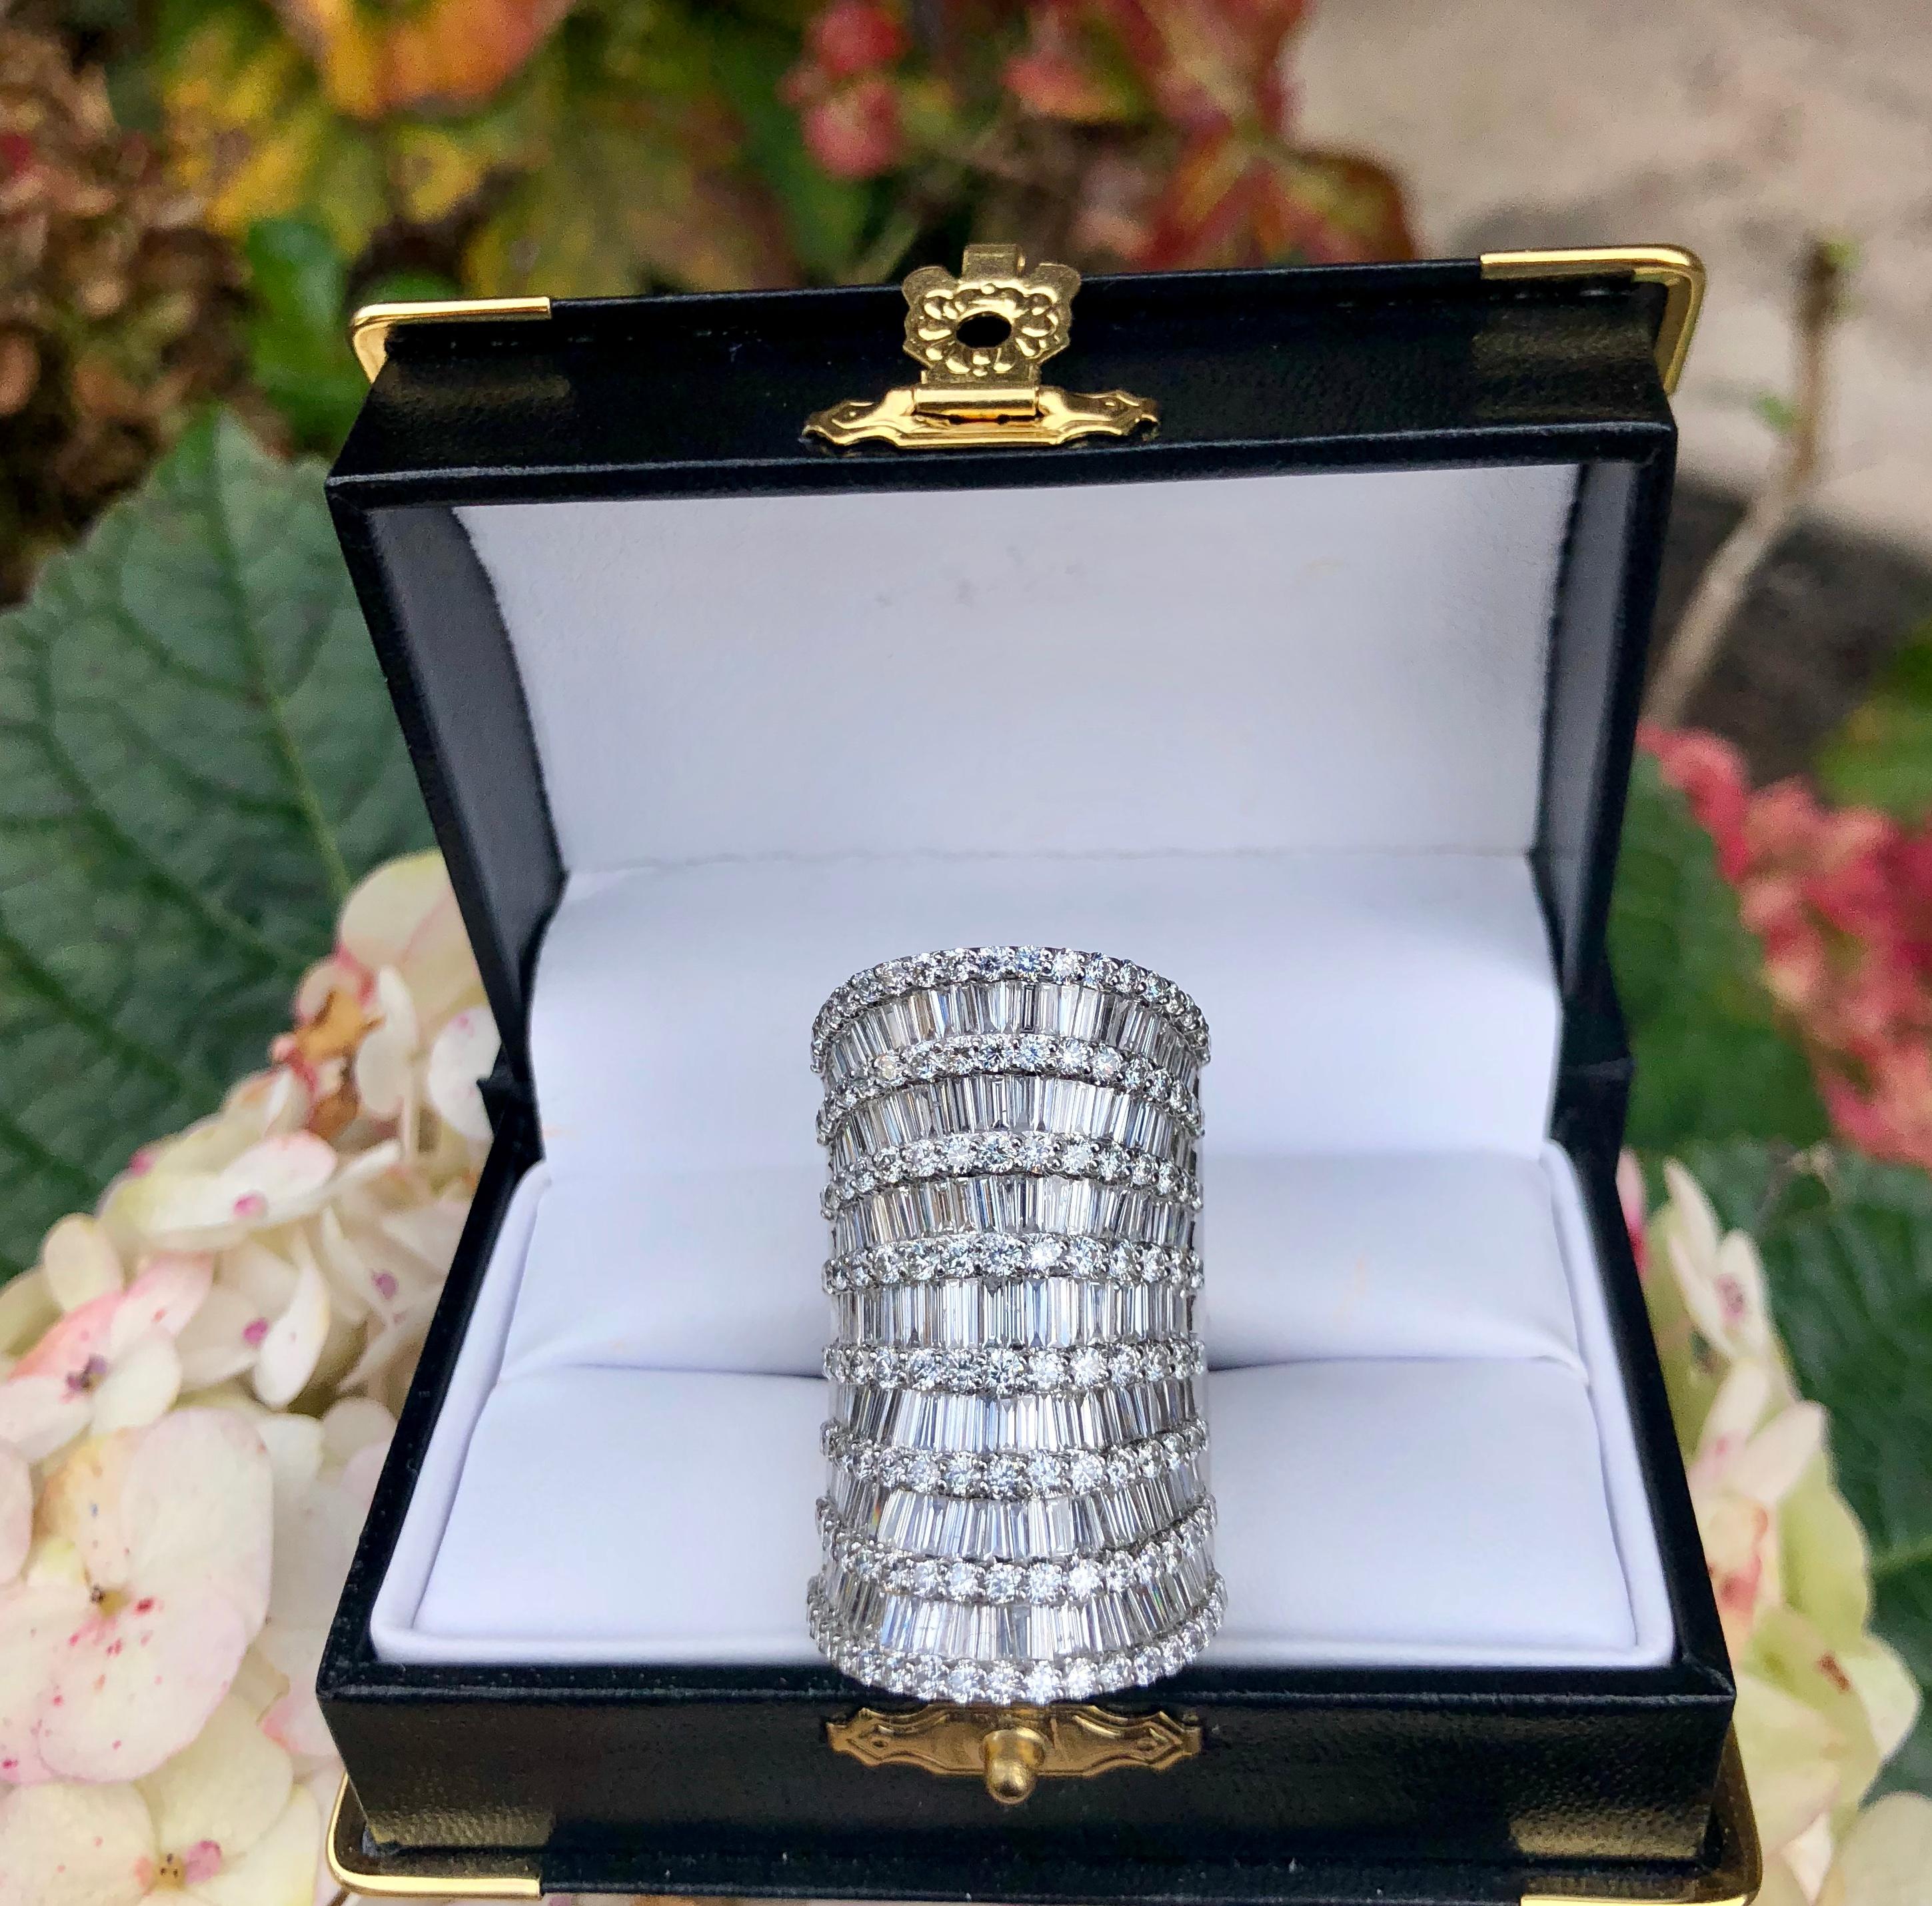 Incredibly sparkly 18 karat white gold cocktail ring features 7 rows of baguette diamonds, separated by 8 rows of prong set round brilliant diamonds.  This is a magnificent ring.  It is very smooth and low profile, and is shaped to fit very